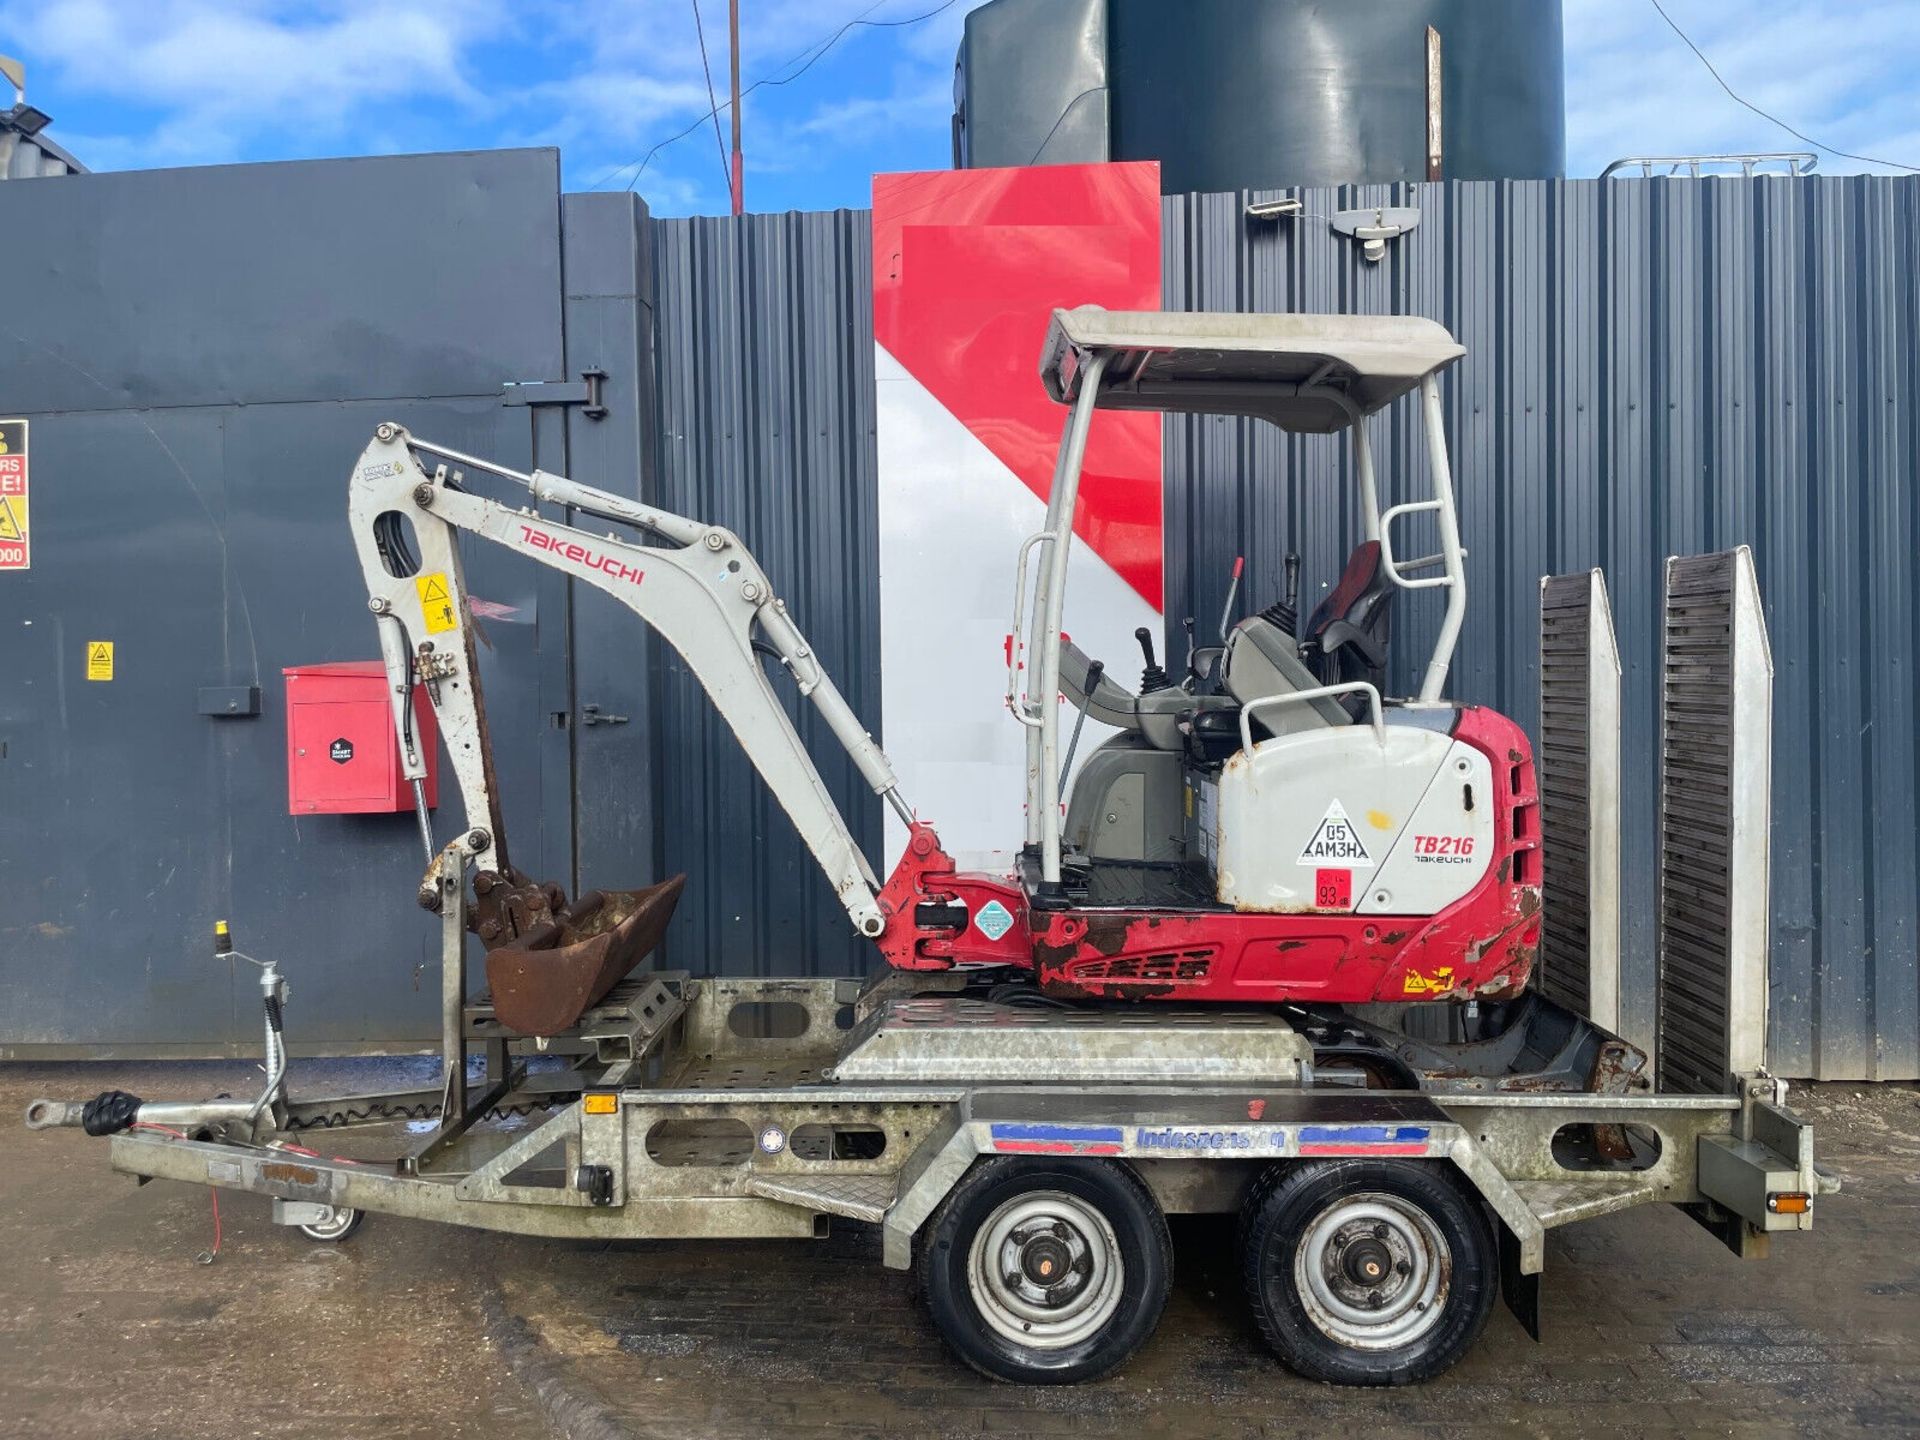 DIG & ROLL: 2015 TAKEUCHI TB216 + 2.7T TRAILER POWERHOUSE - Image 2 of 6